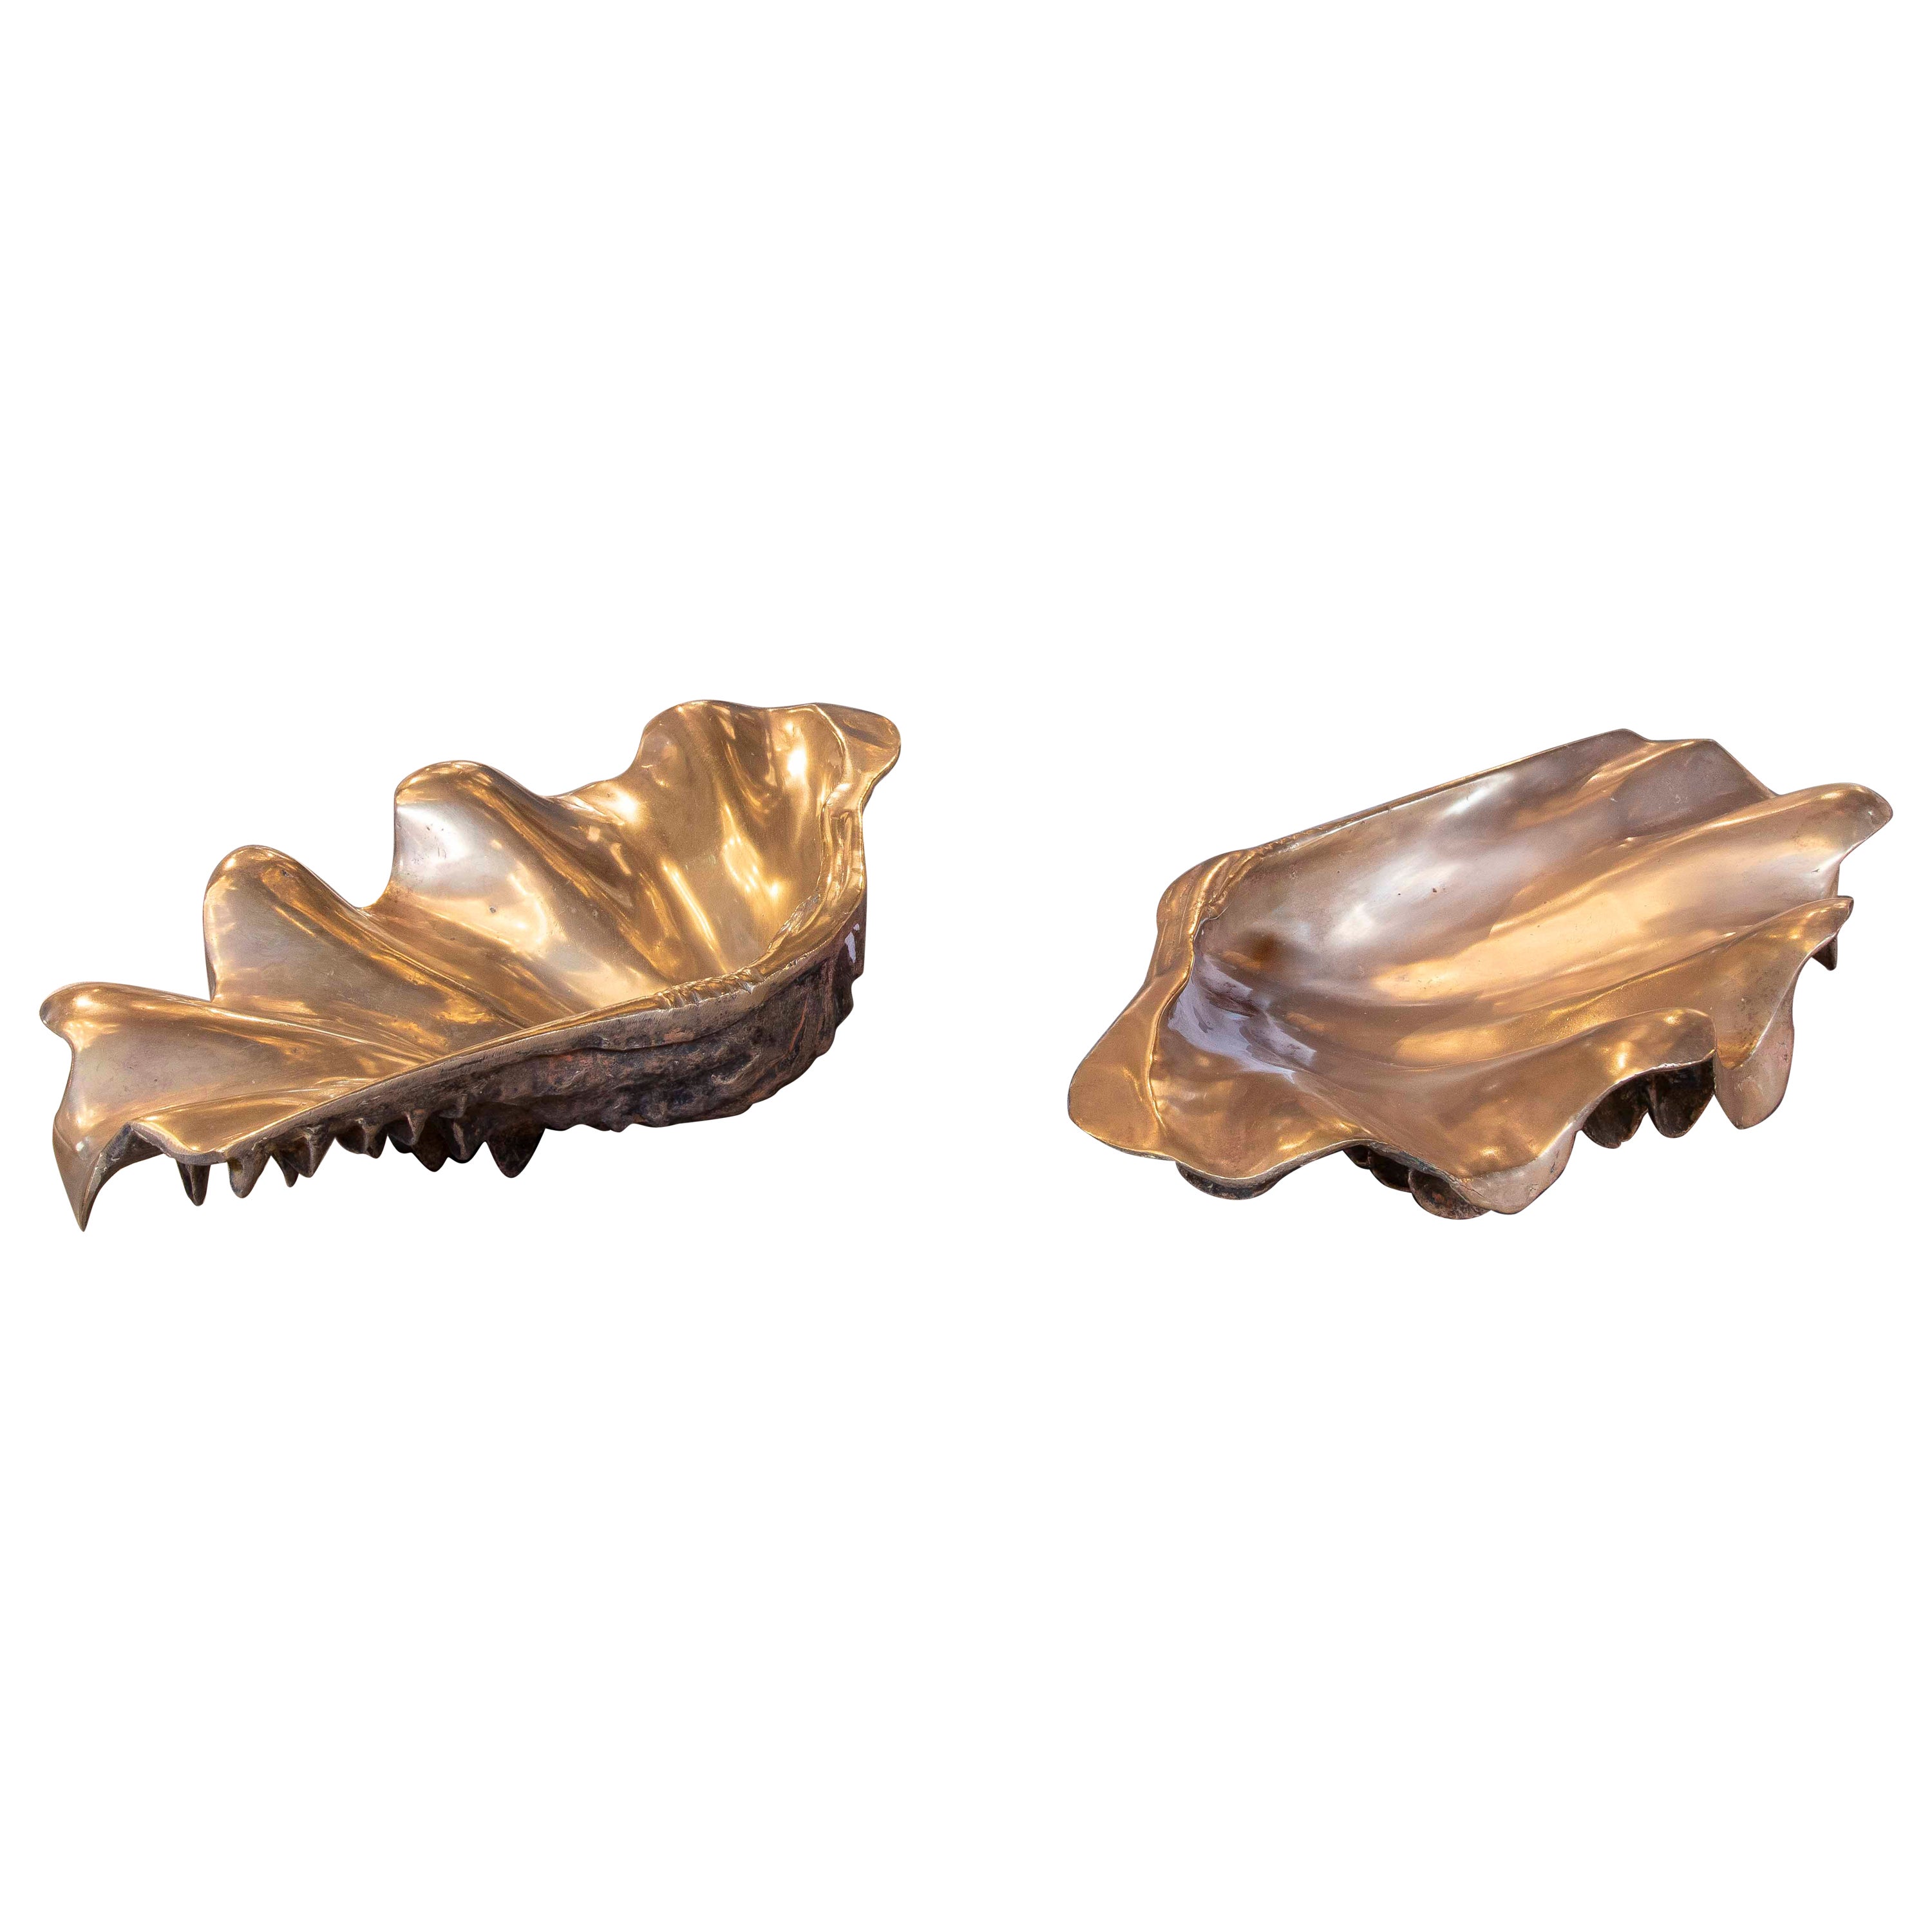 1970s Pair of Two-Tone Bronze Shells 